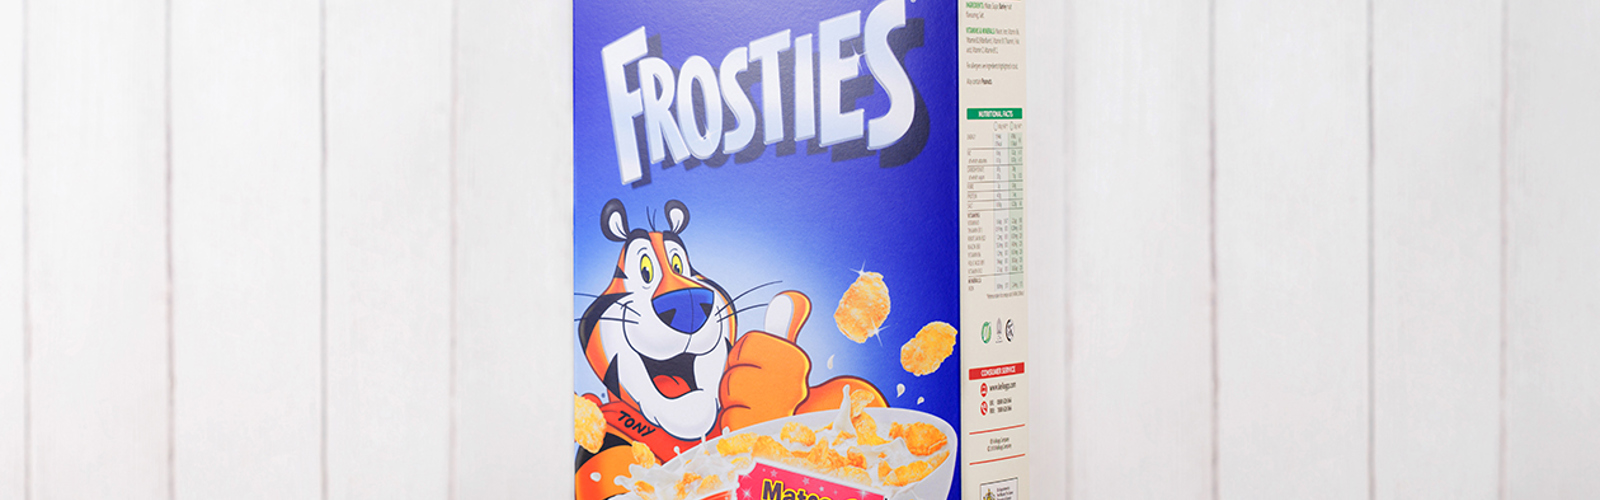 A packet of Frosties